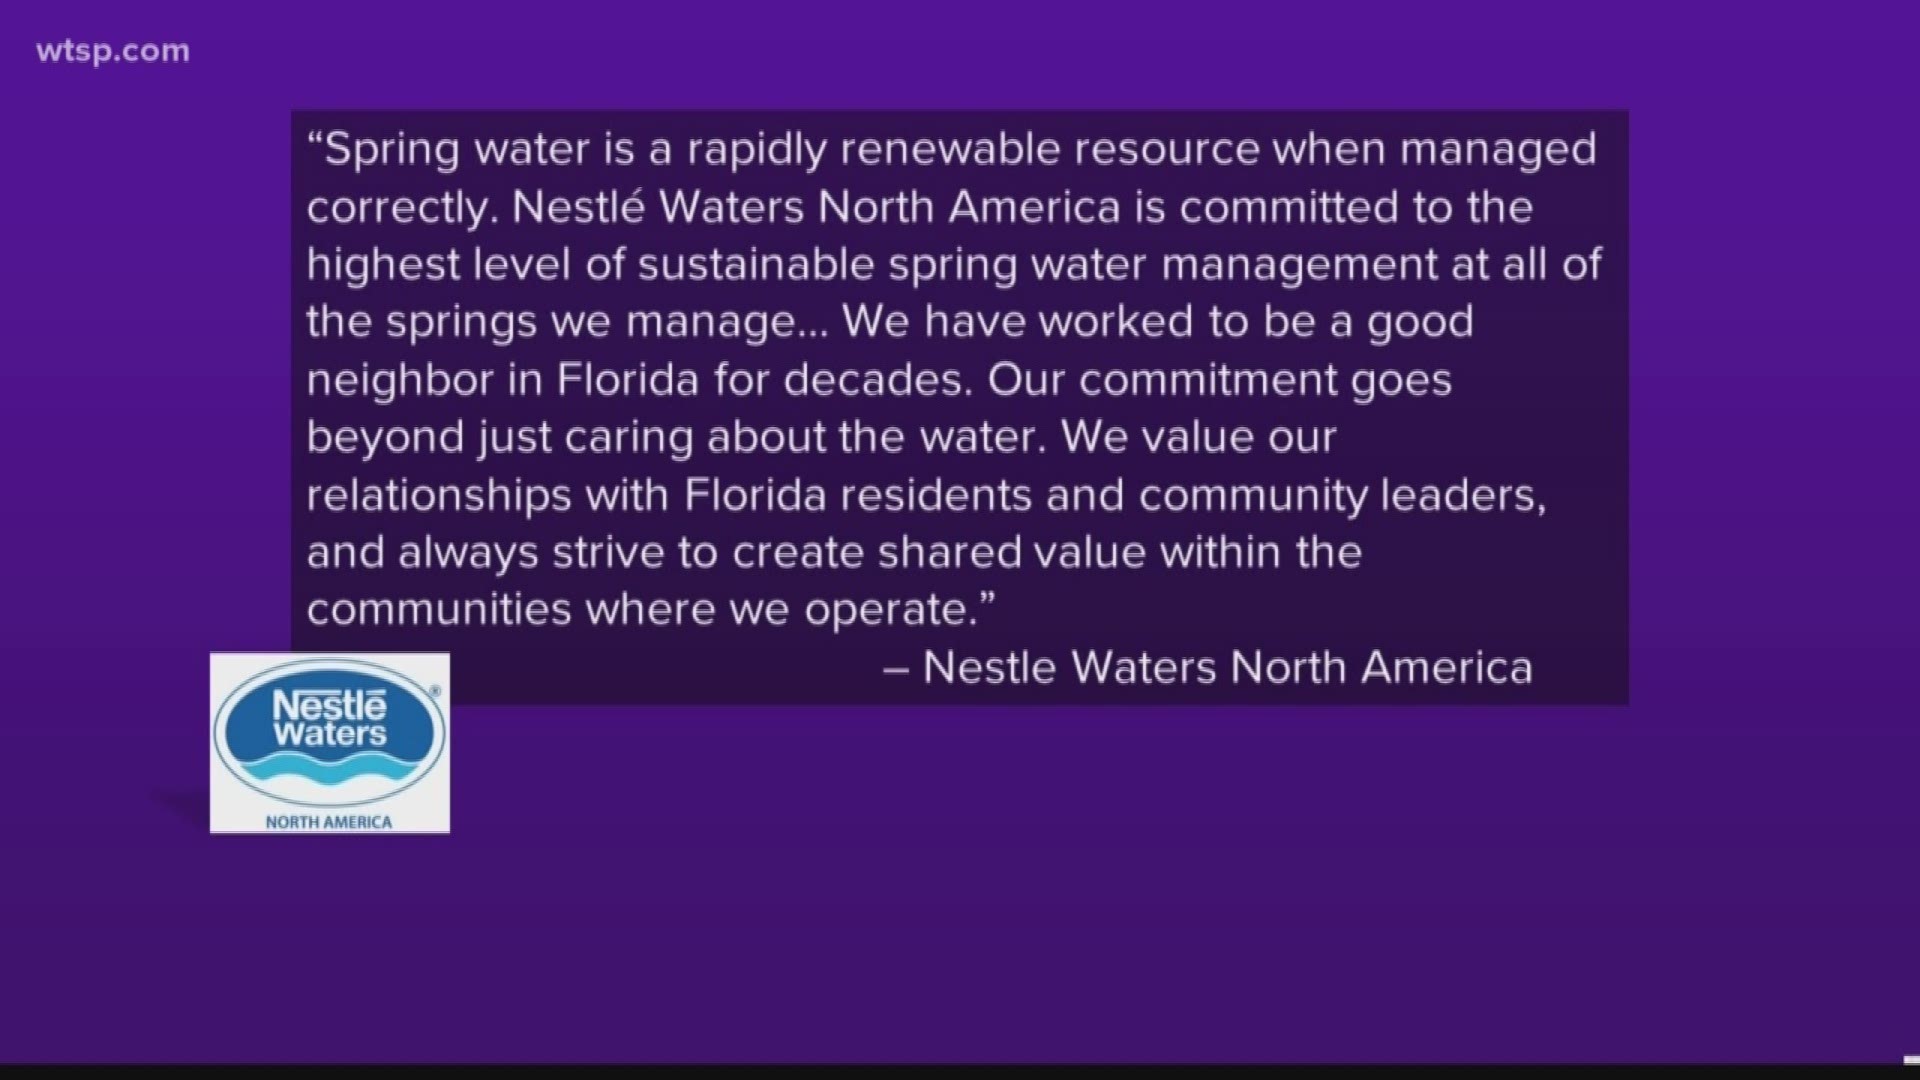 Nestlé maintains that 1.2 million gallons of water per day is a proverbial drop-in-the-bucket compared with the normal flow of water in the area. https://on.wtsp.com/2MEgmz1